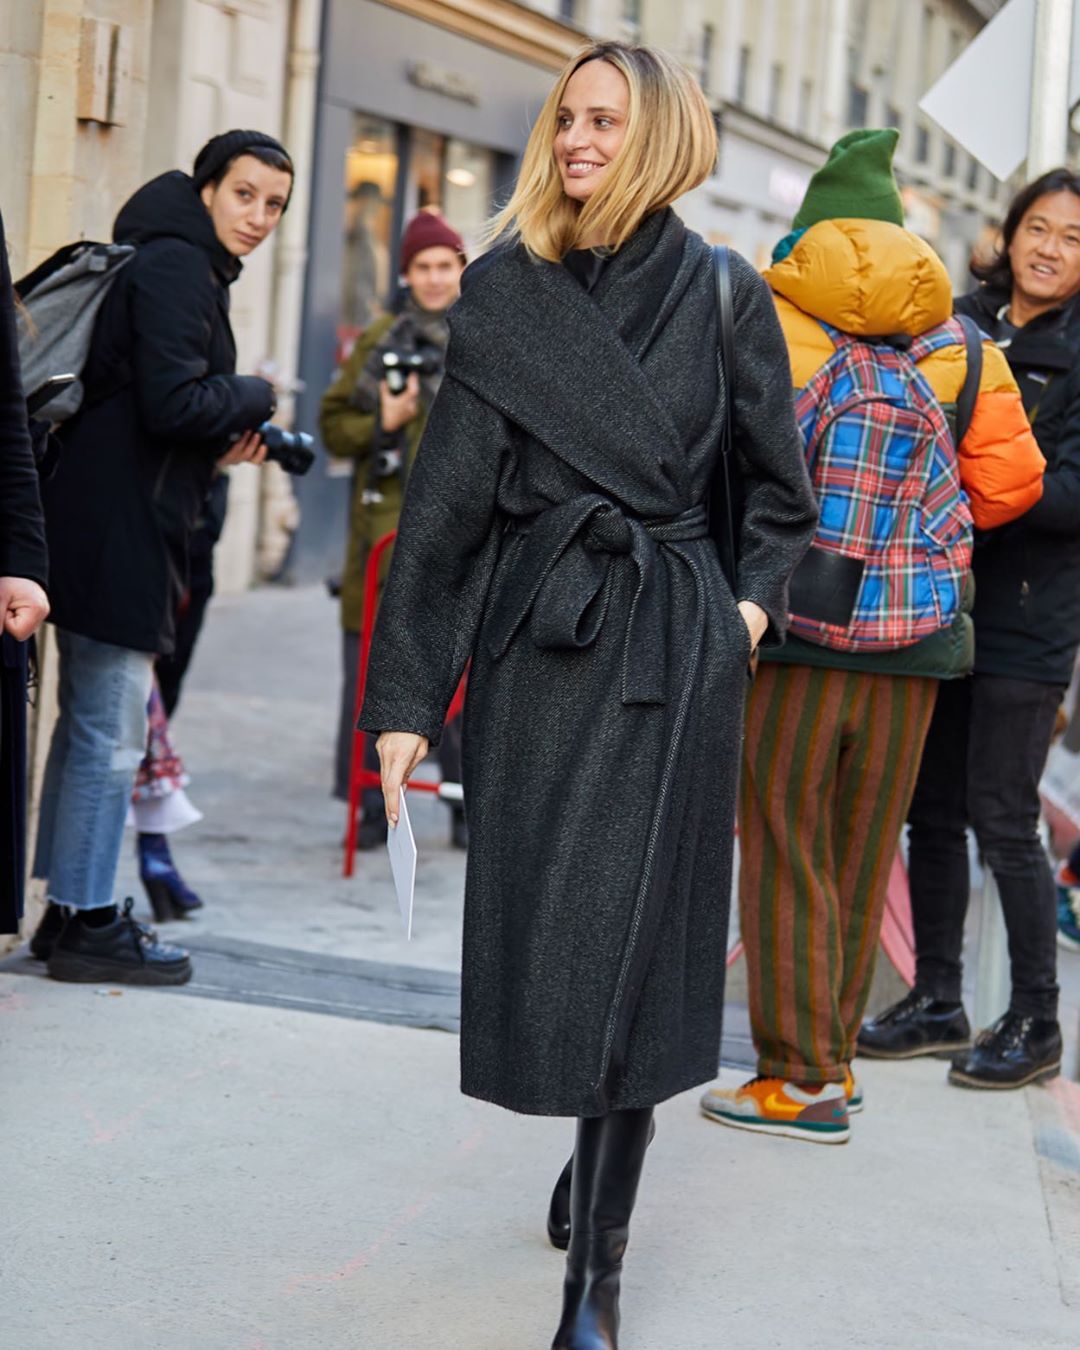 This It Girl Knows the Power of a Great Coat